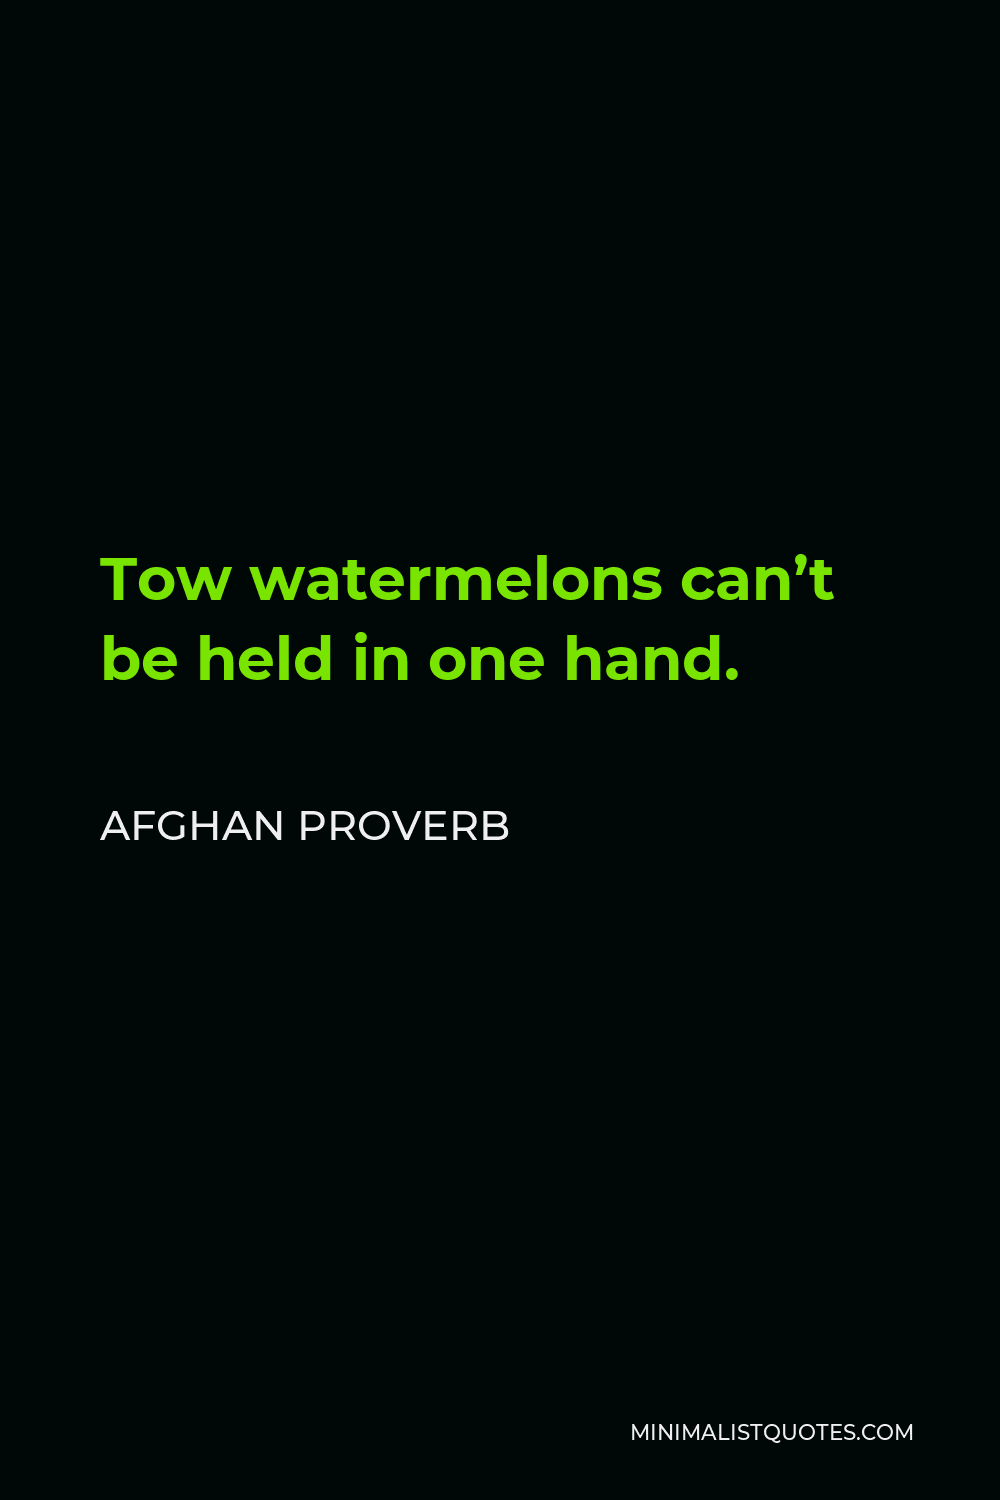 Afghan Proverb Quote - Tow watermelons can’t be held in one hand.